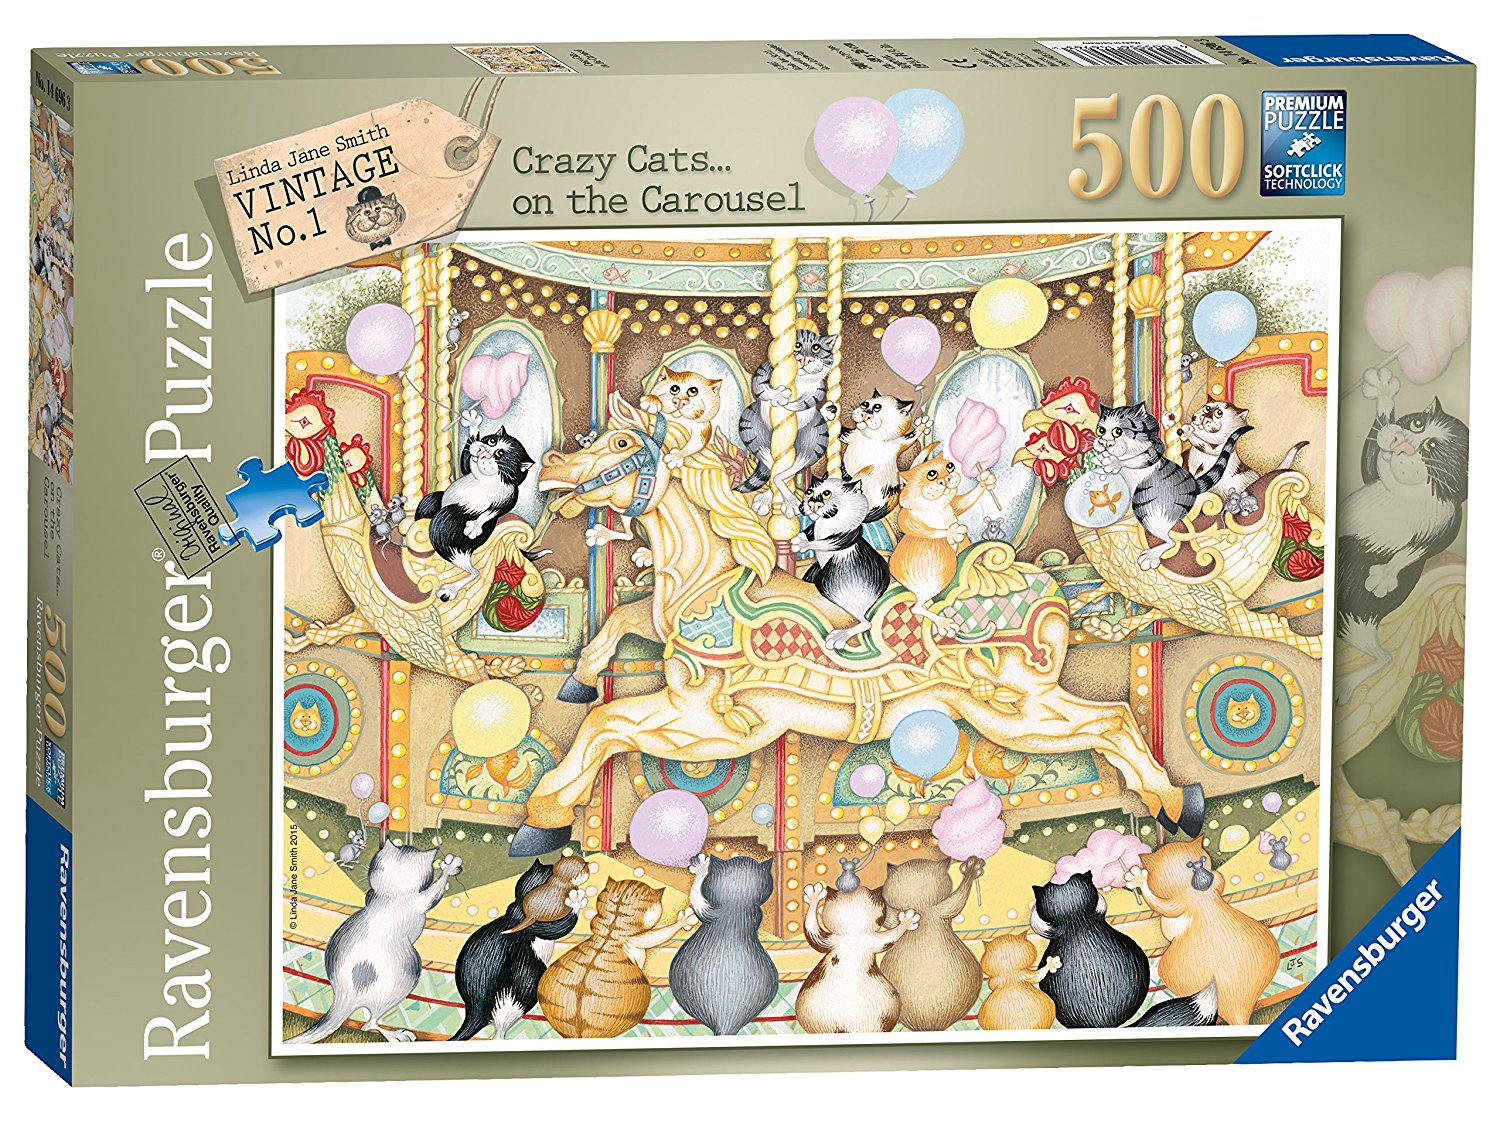 Crazy Cats Vintage Carouse 500 Piece Jigsaw Puzzle Game